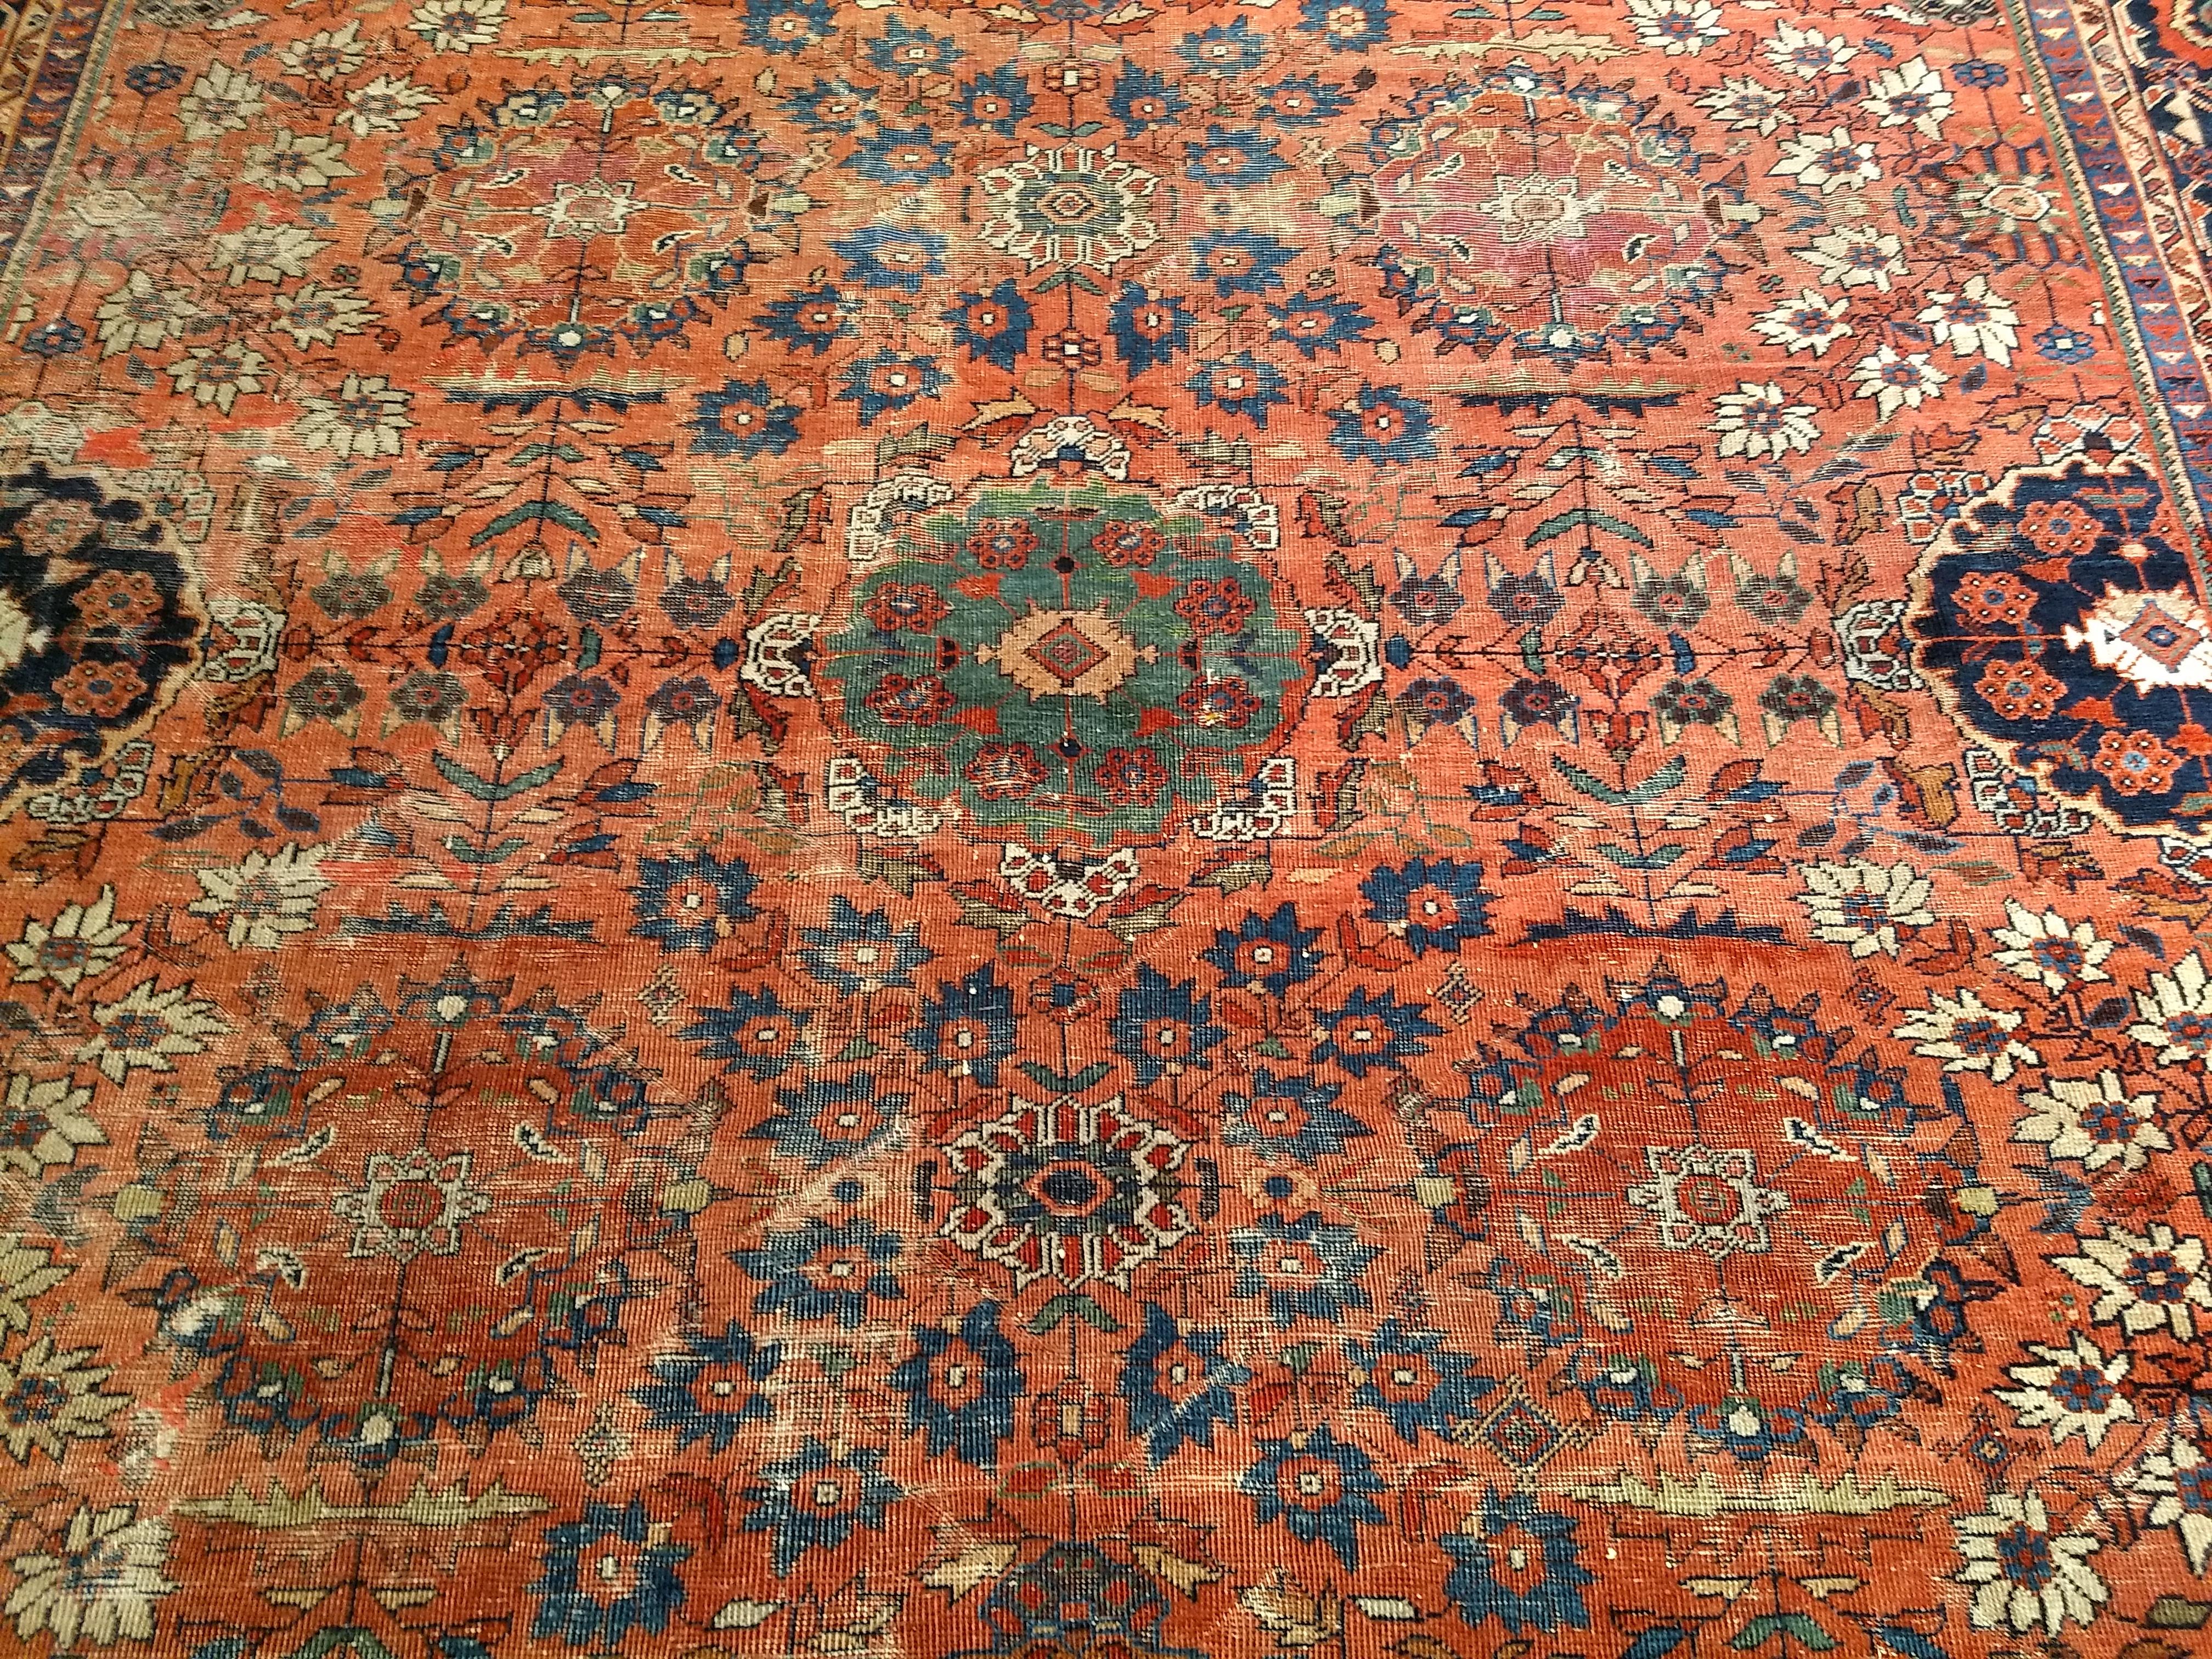 Vintage Persian Mahal Sultanabad Room Size Rug in Brick Red, Navy Blue 3